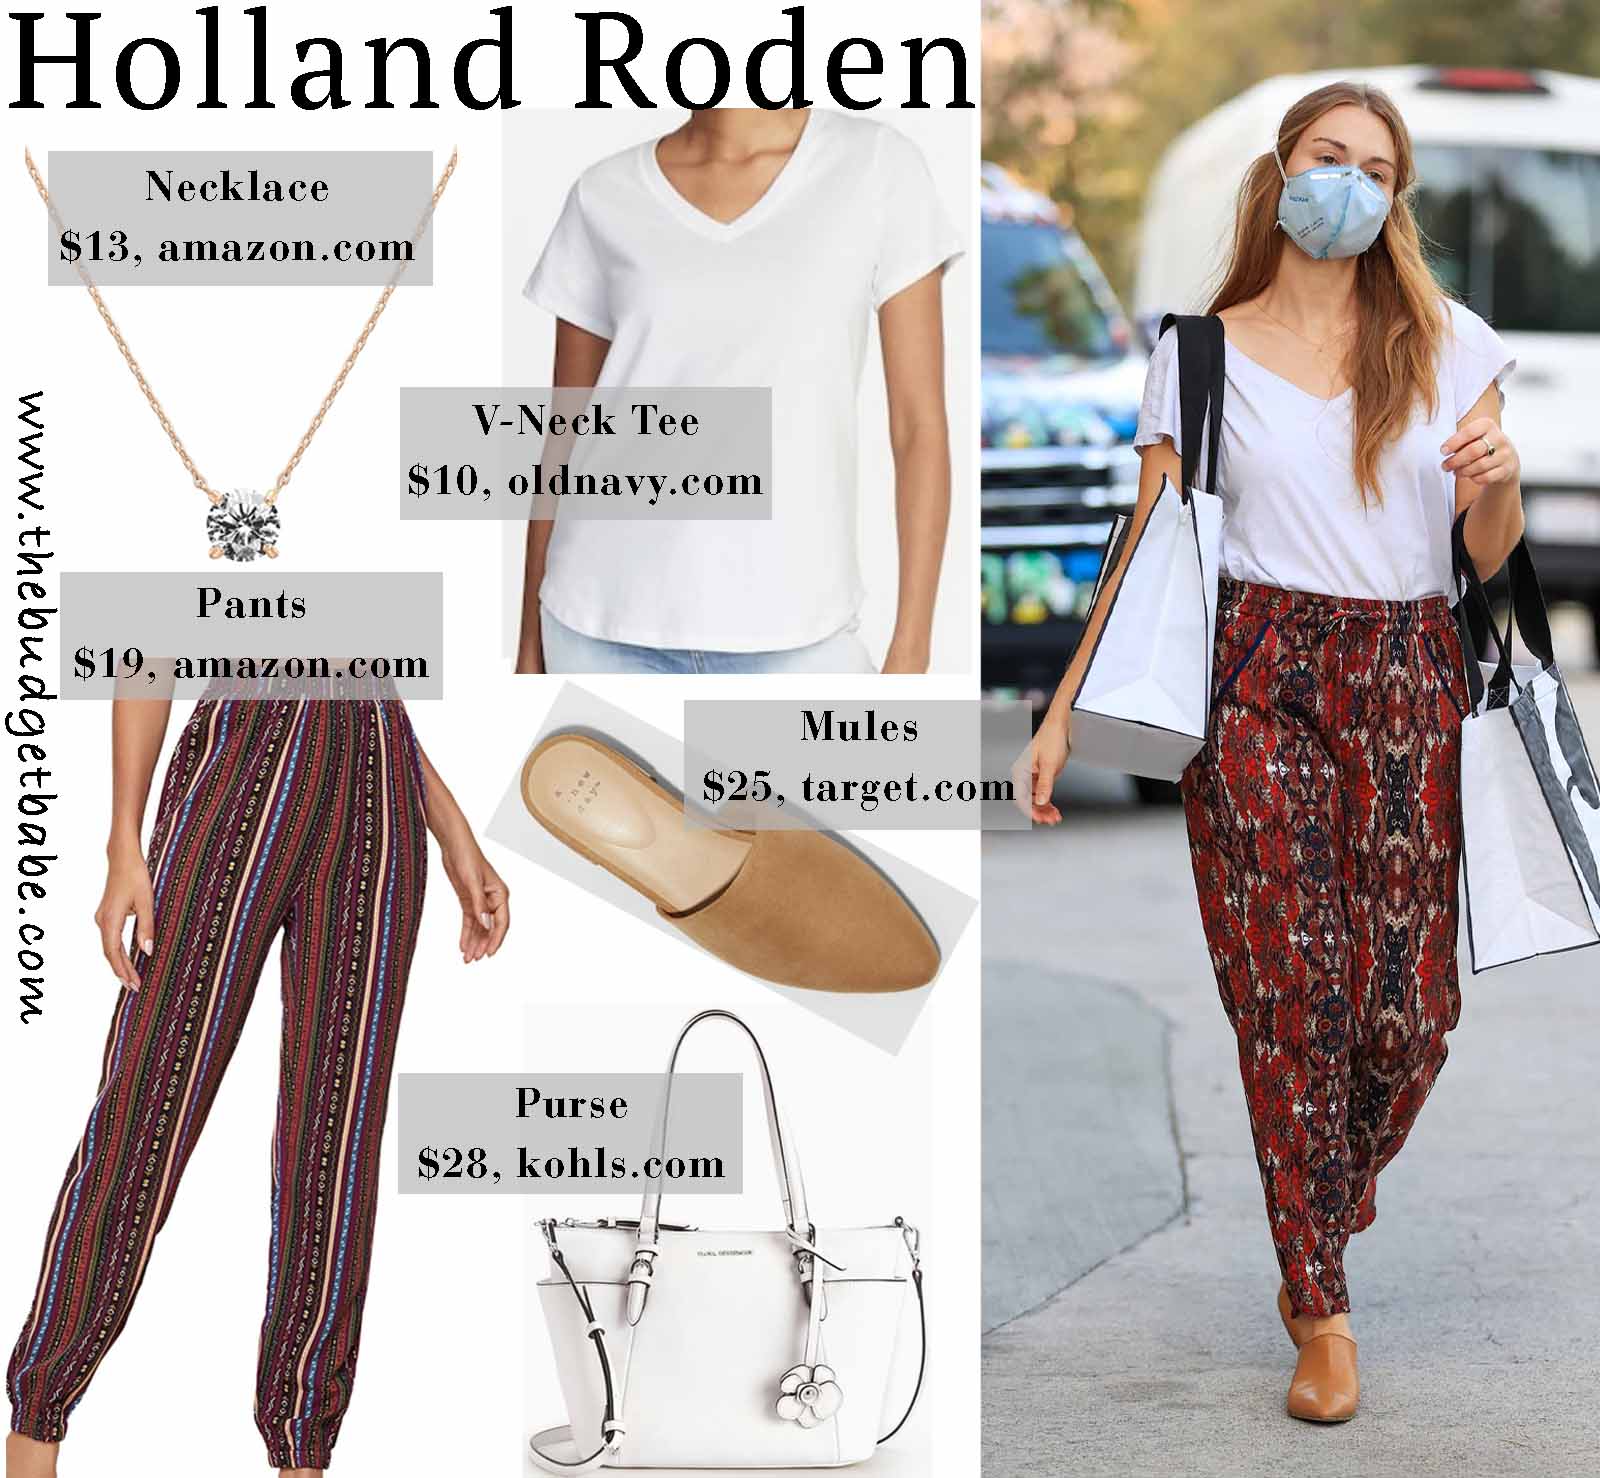 Holland's joggers are amazing!